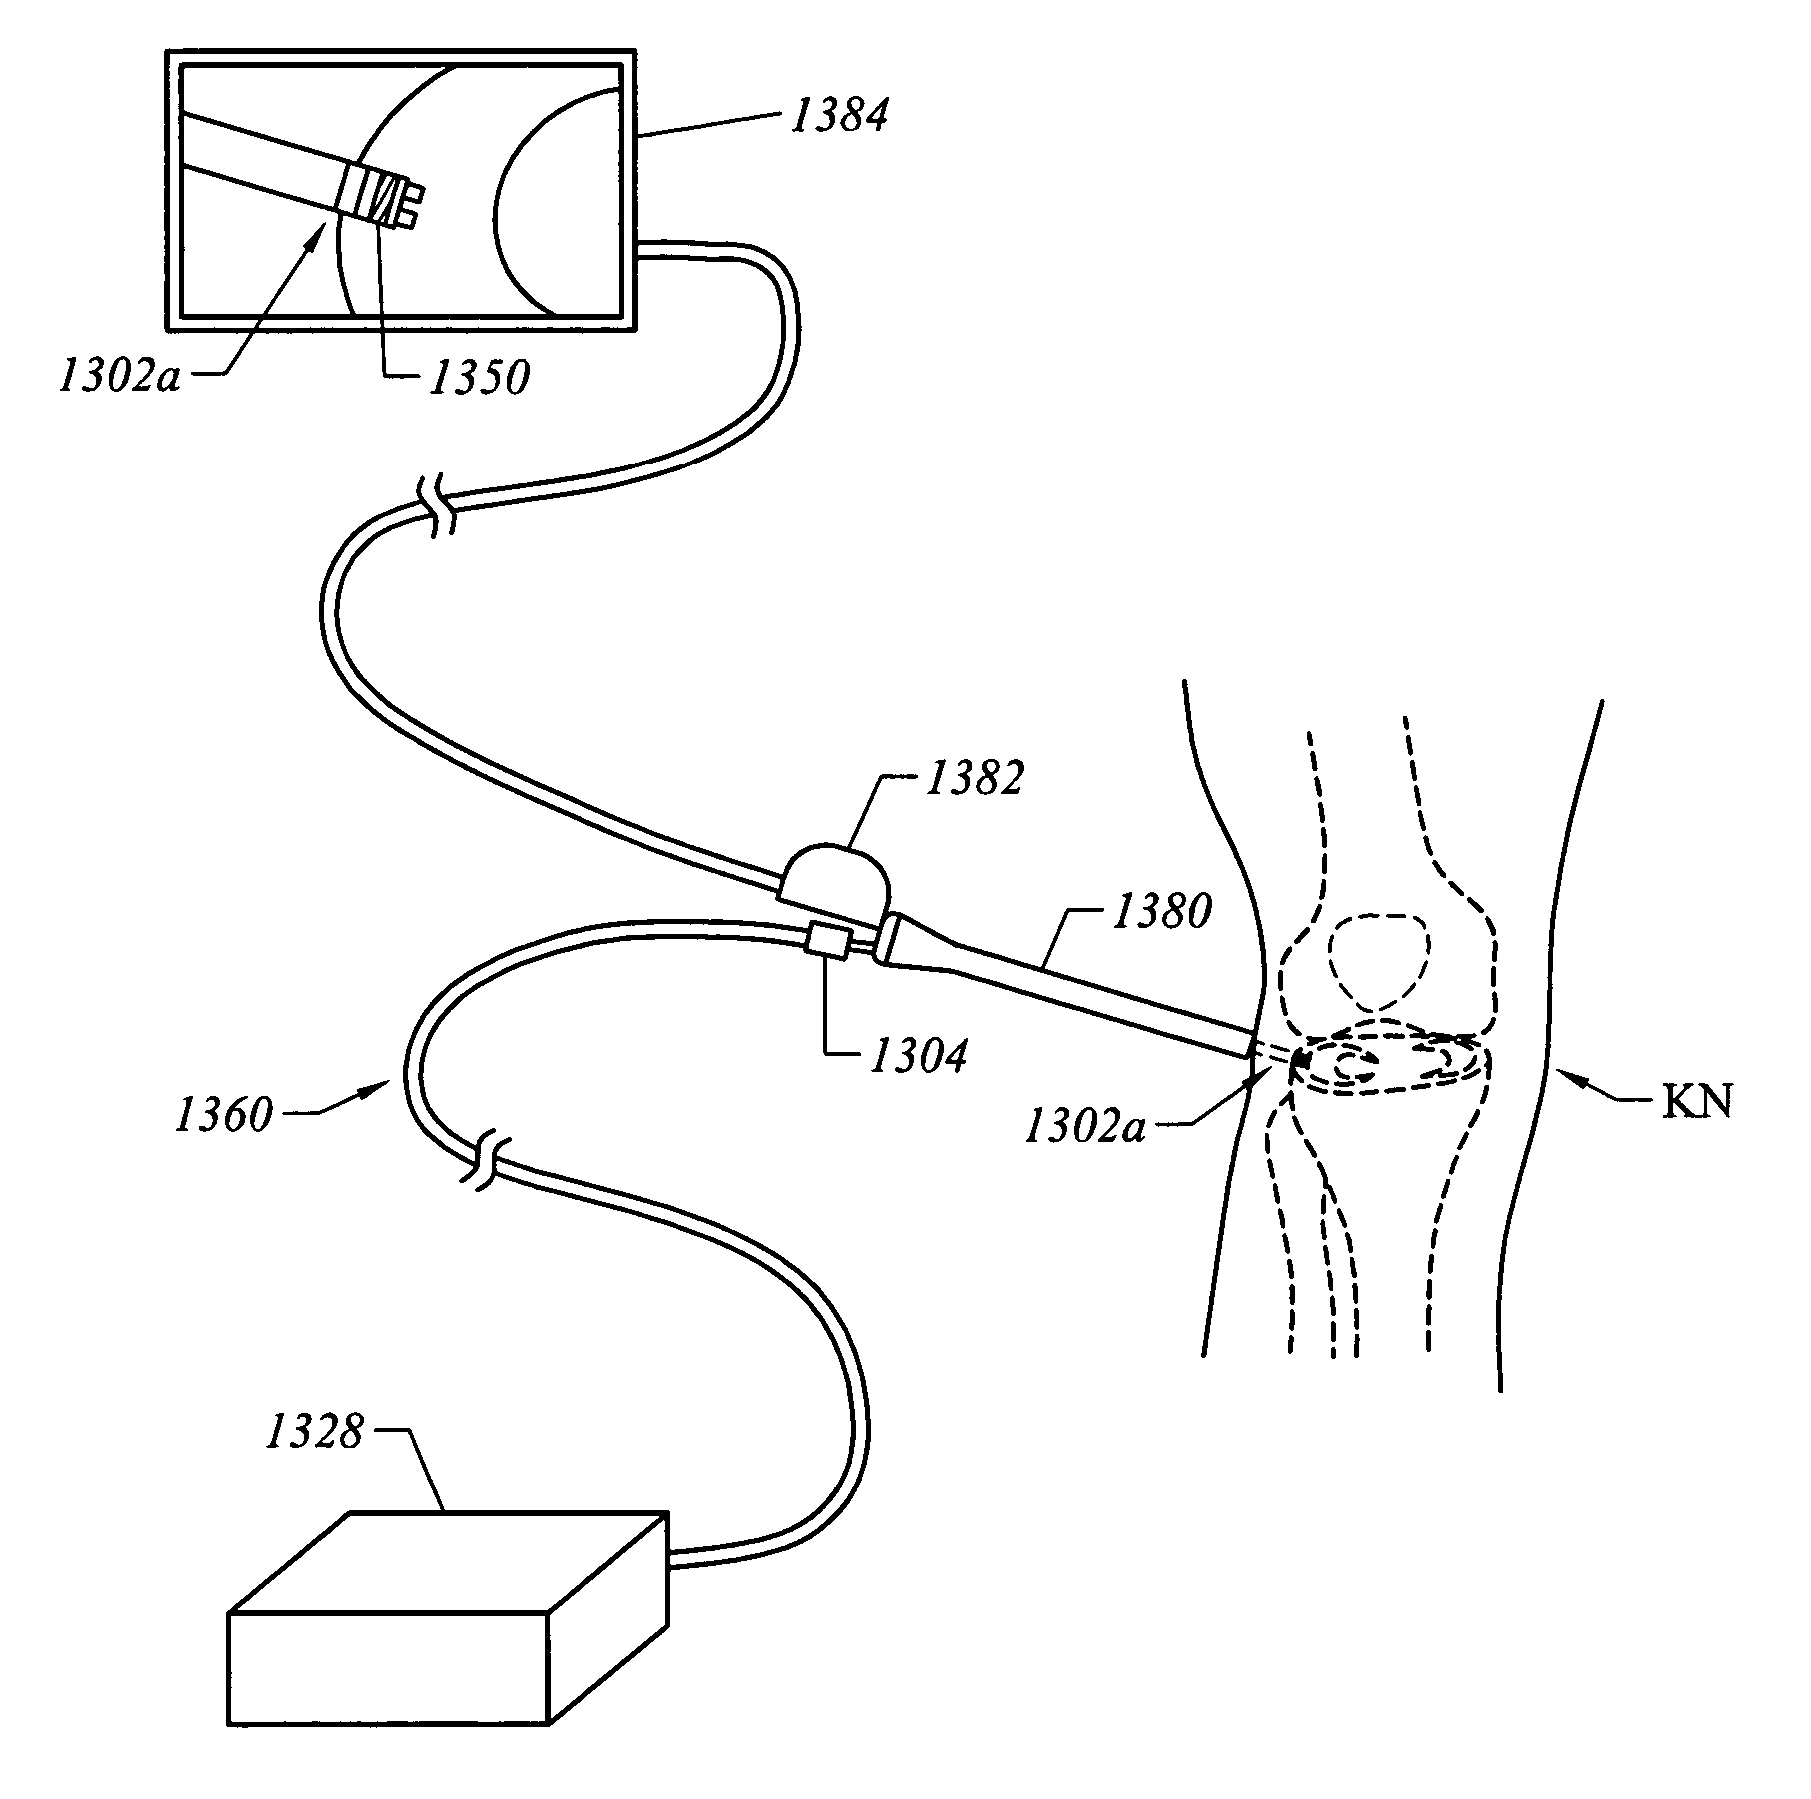 Temperature indicating electrosurgical apparatus and methods